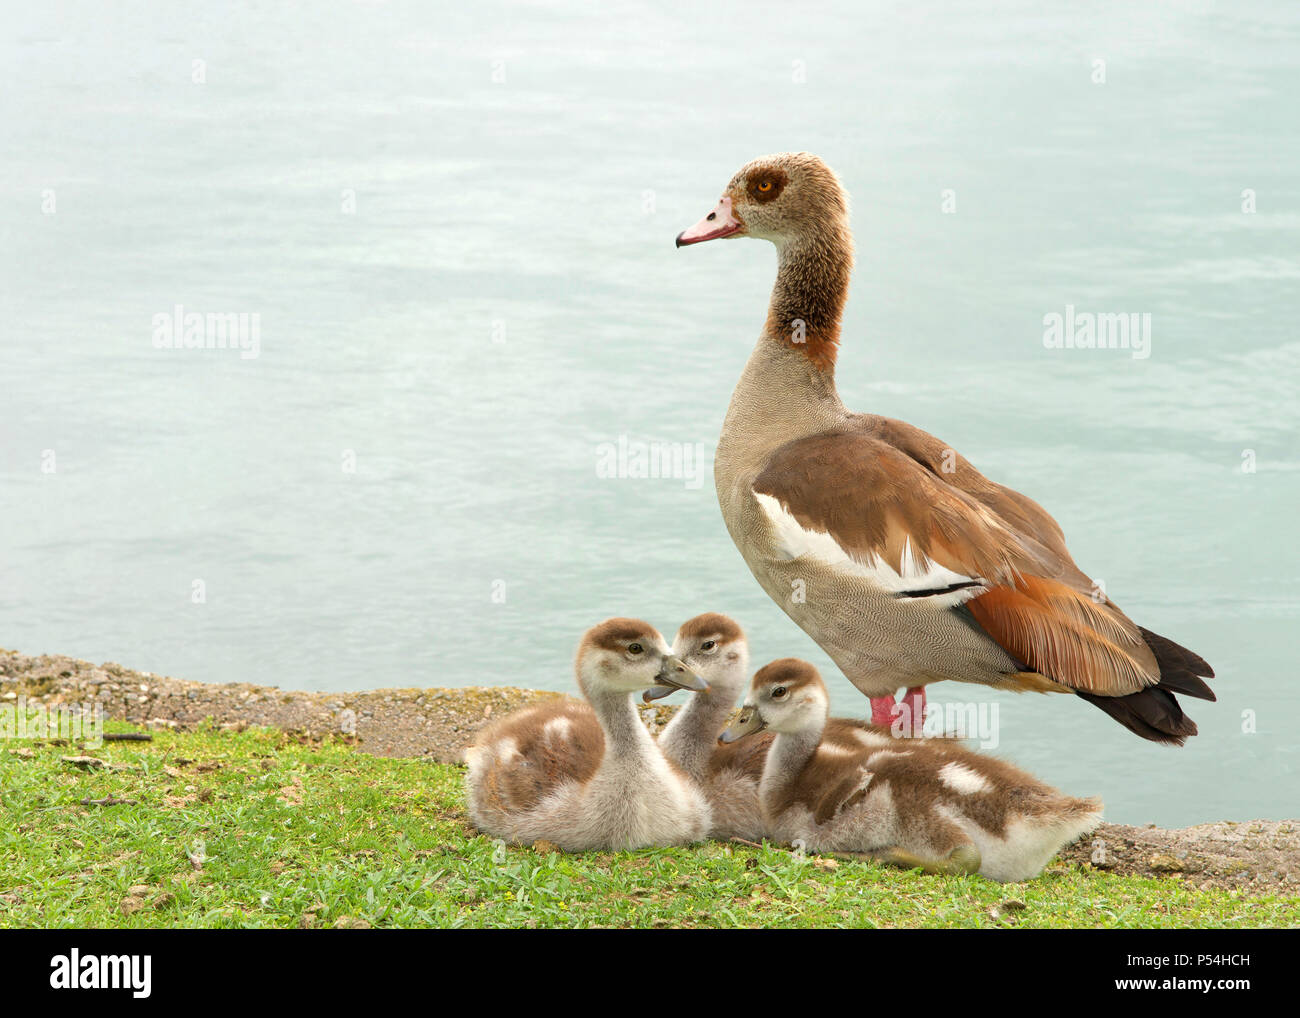 One adult Egyptian Goose with baby geese huddled on green grass next to a calm lake. Egyptian geese were considered sacred by the Ancient Egyptians, a Stock Photo